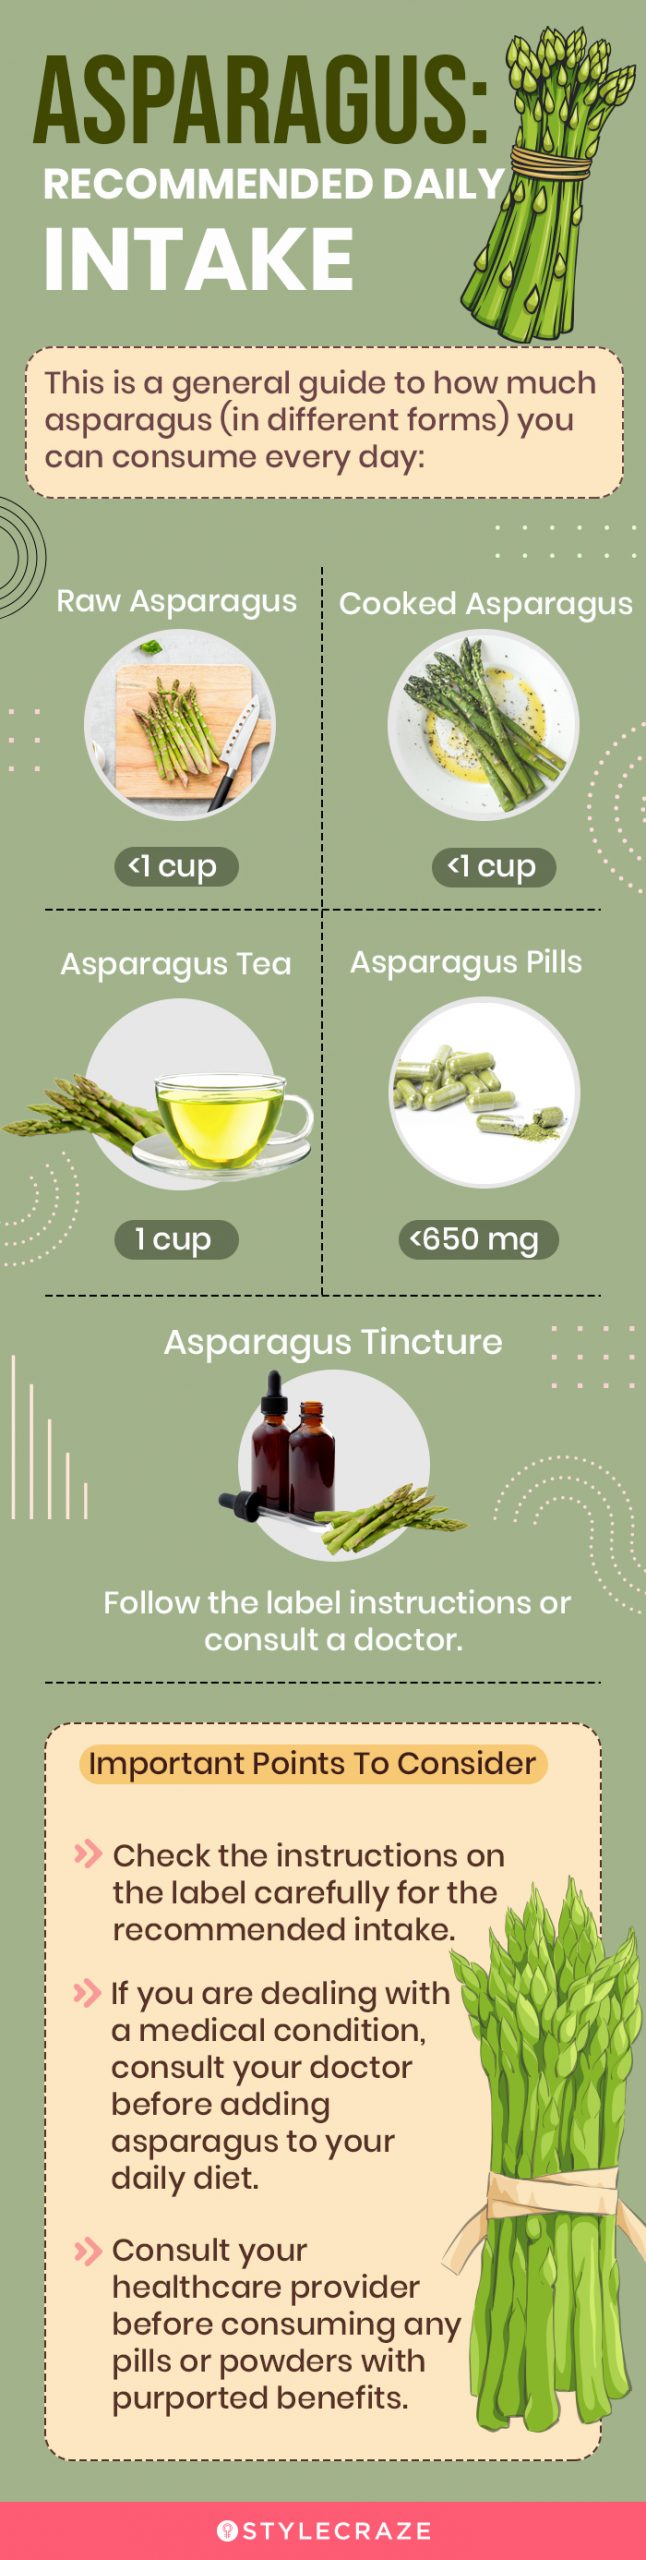 asparagus – recommended daily intake [infographic]